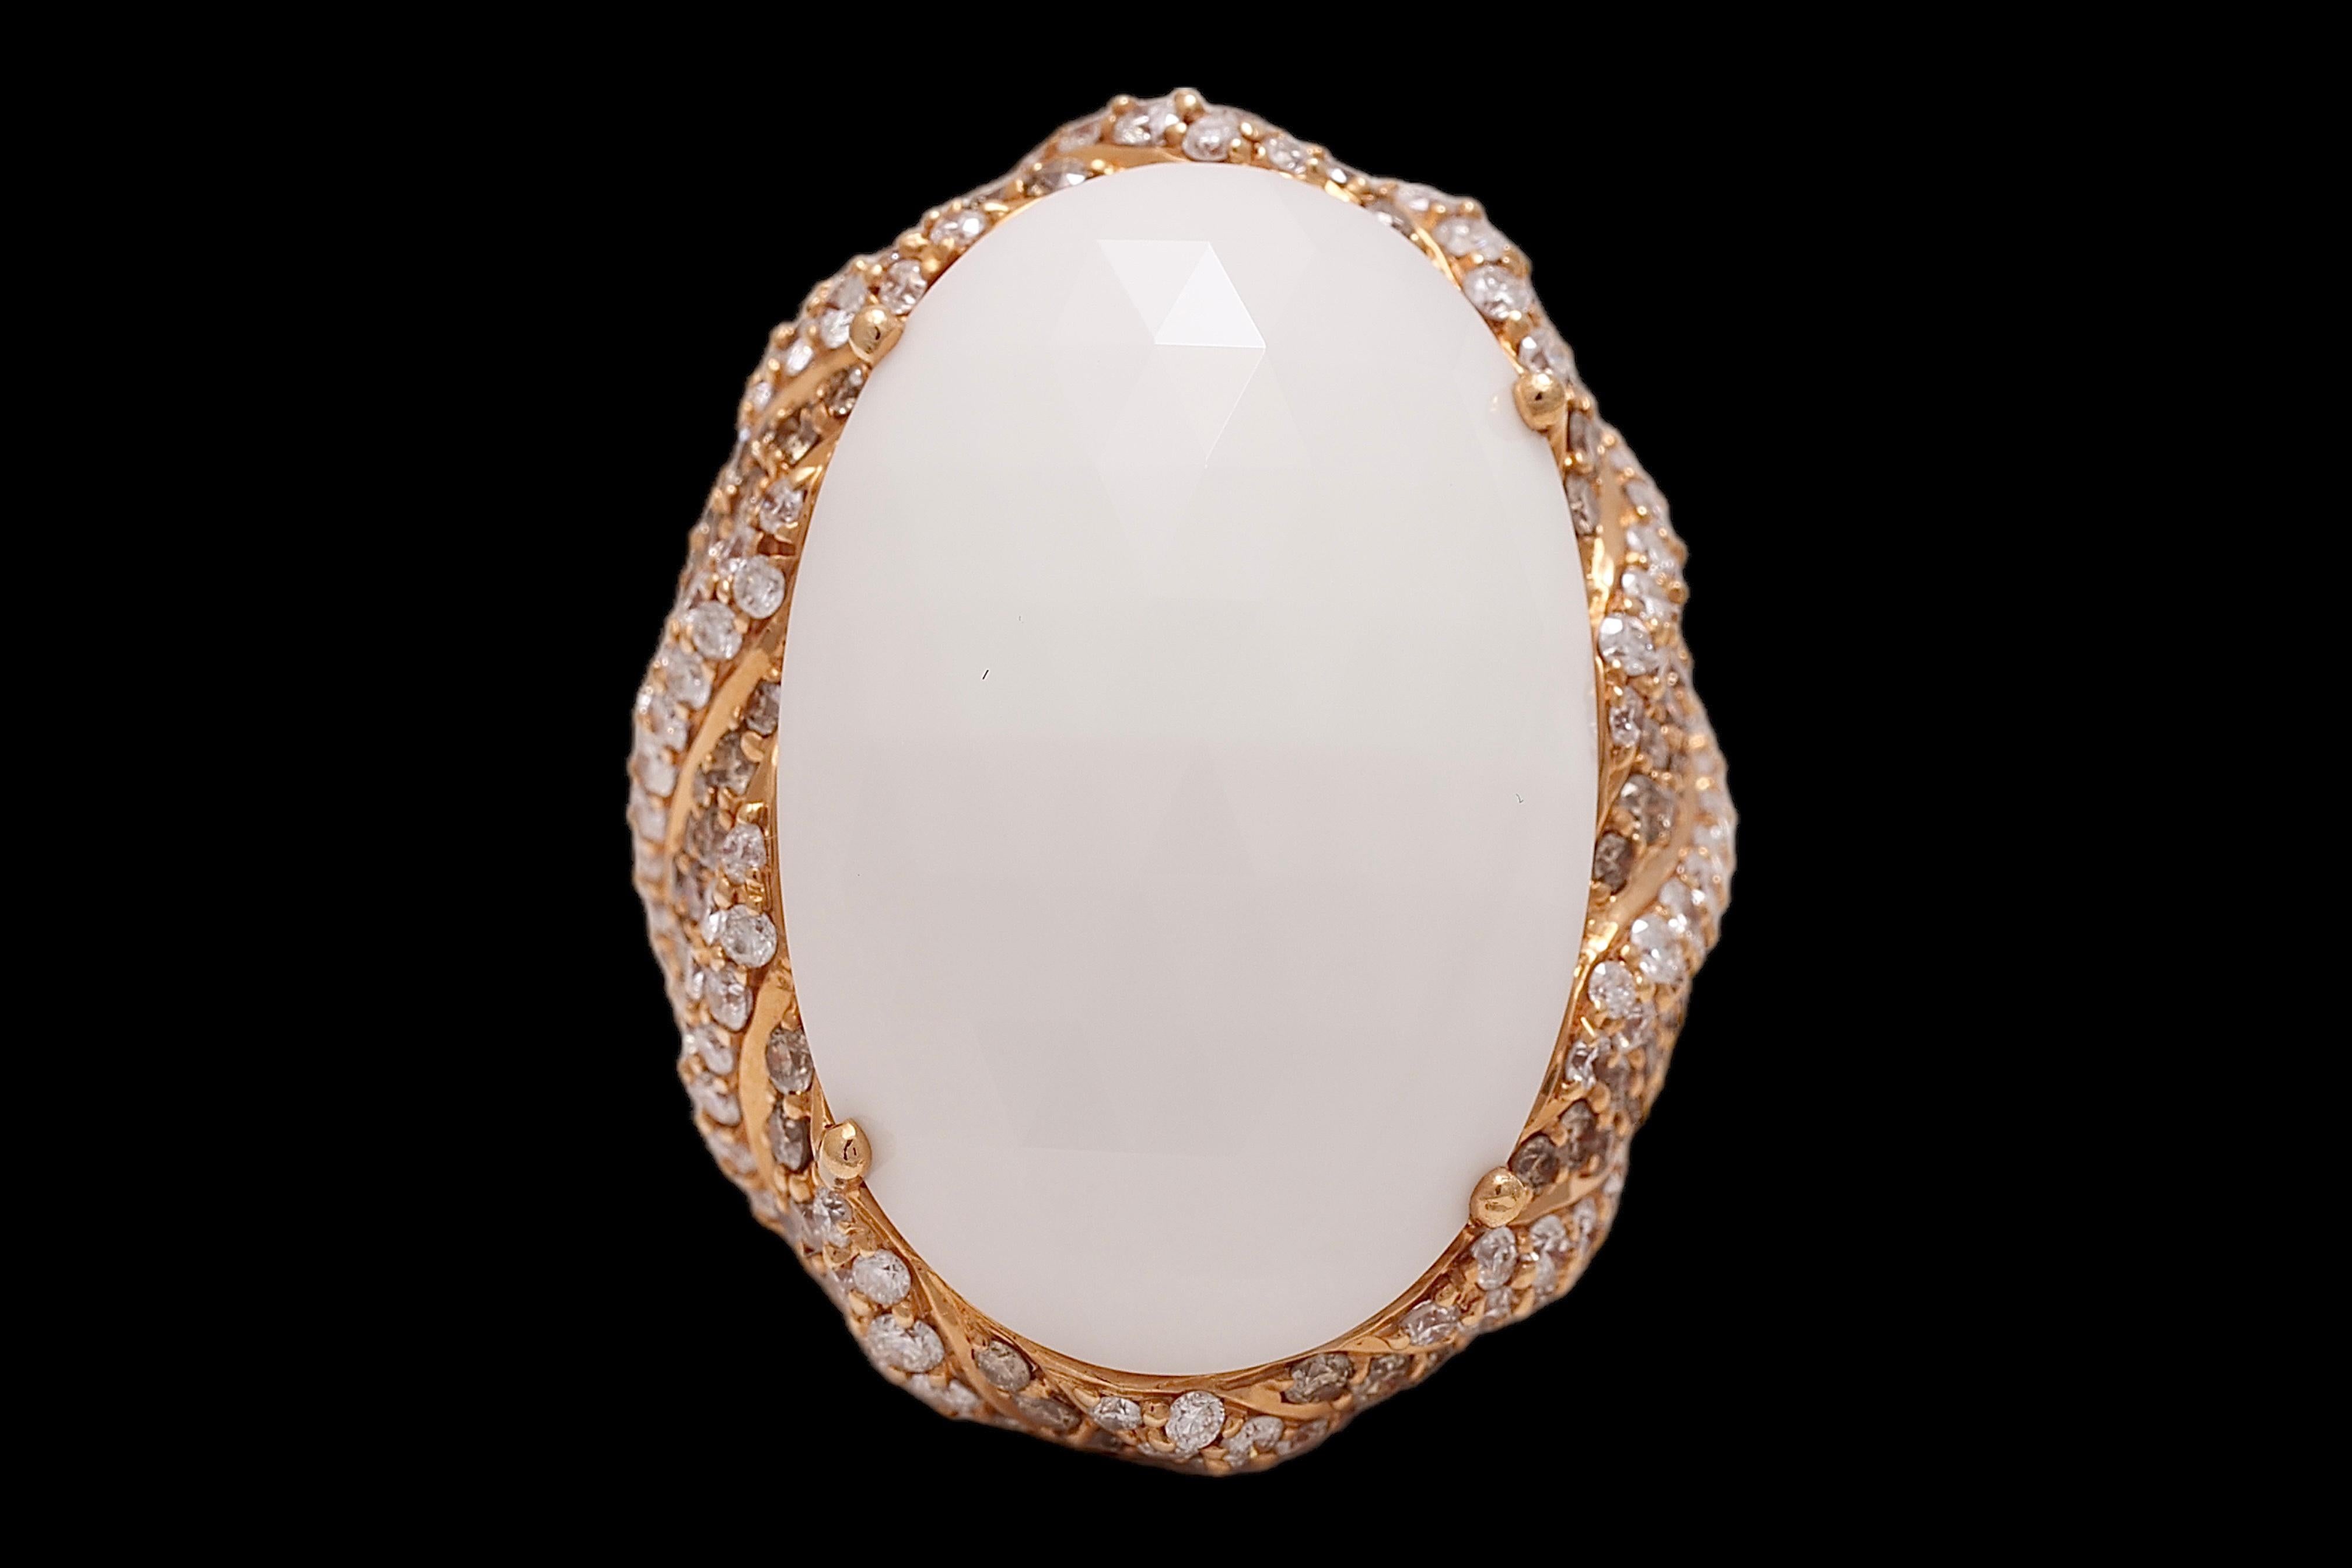 Gorgeous and Elegant 18kt Pink Gold Ring With 5.9 ct Agate Stone and 3.8 ct White & Cognac Brilliant Cut Diamonds 

Diamonds: Brilliant cut diamonds, together approx. 2.03 ct. GSI, cognac diamonds together approx. 1.73 ct.

Agate: White oval shape